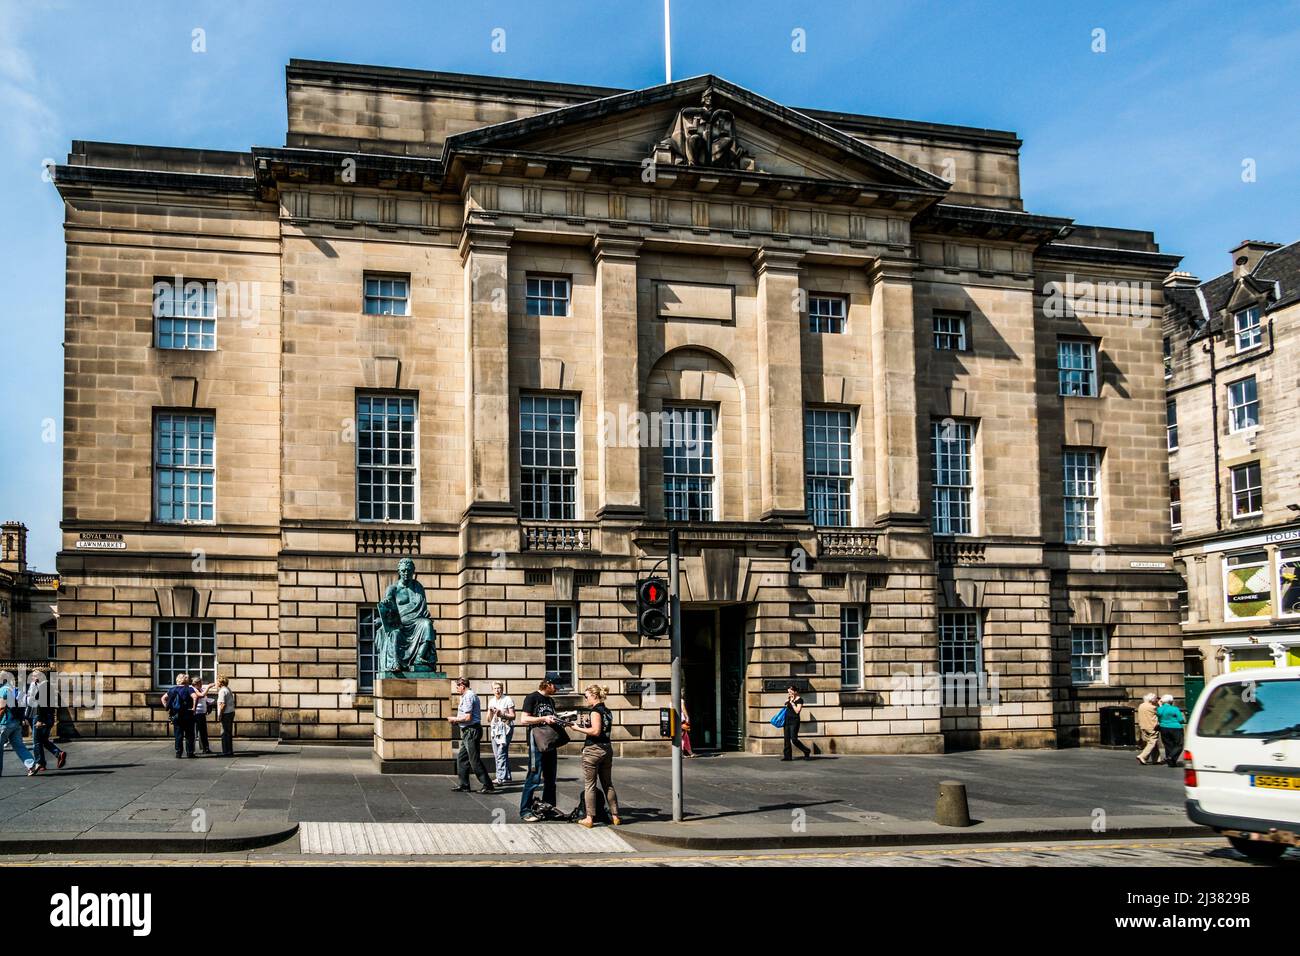 Statue of David Hume in front of High Court Building, Royal Mile, Old Town, Edinburgh, United Kingdom. Stock Photo